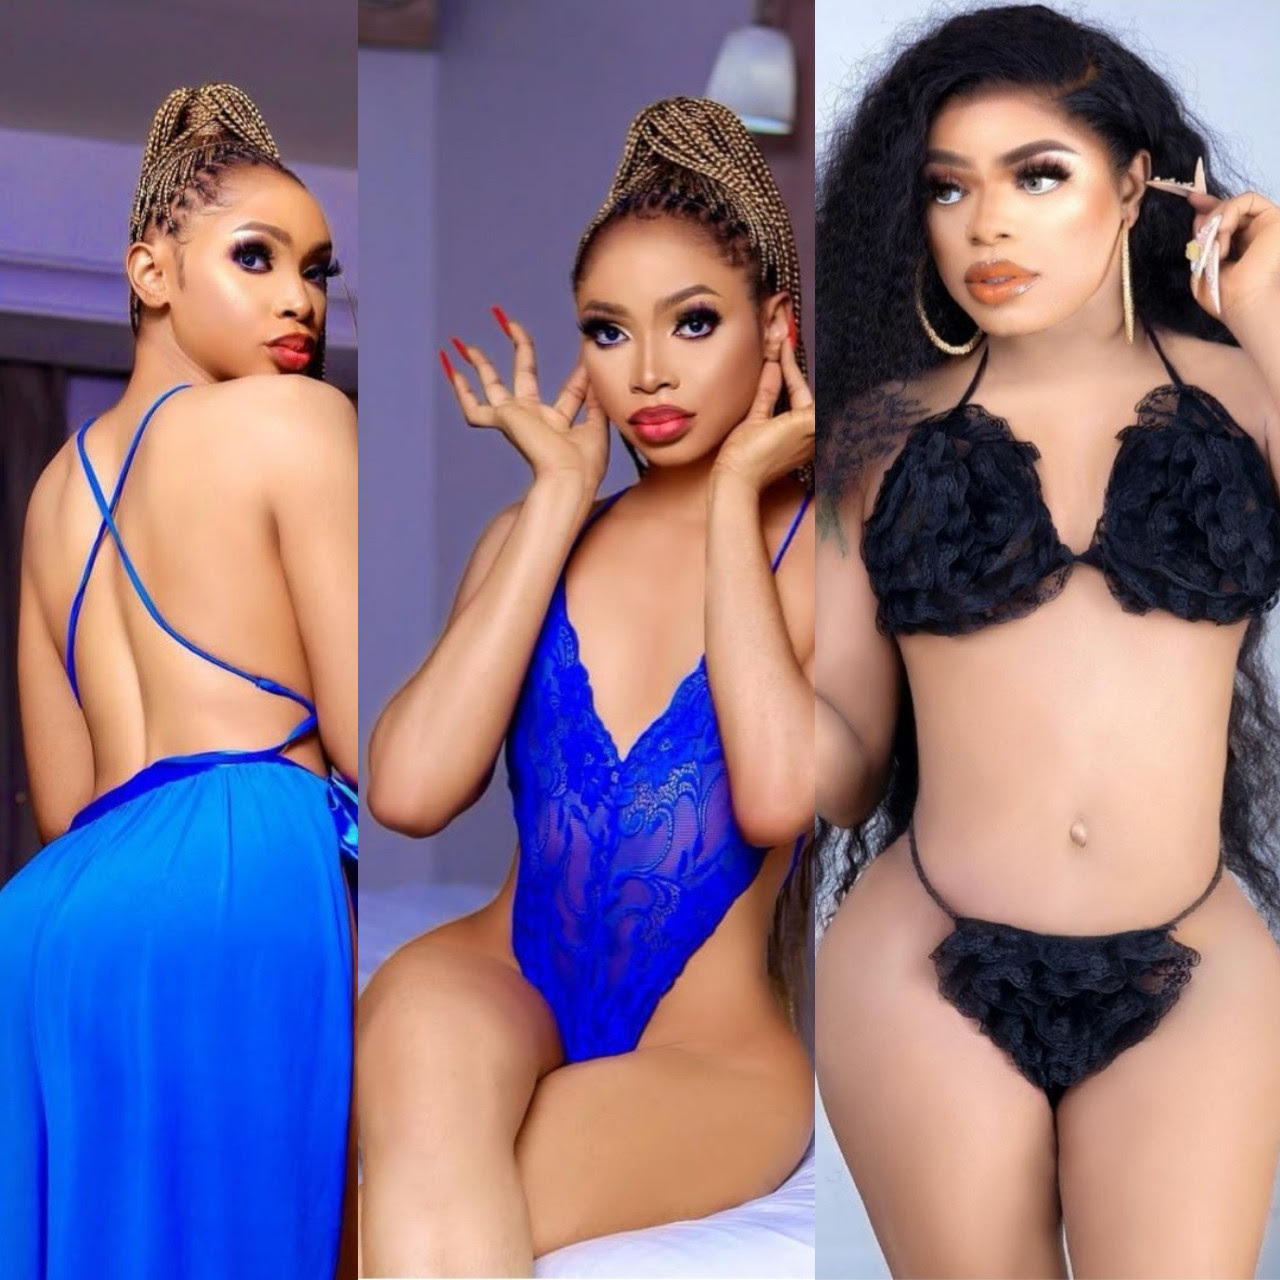 Throwing shade? Crossdresser Jay Boogie talks about his "real body" just after Bobrisky showed off his surgically-enhanced curves